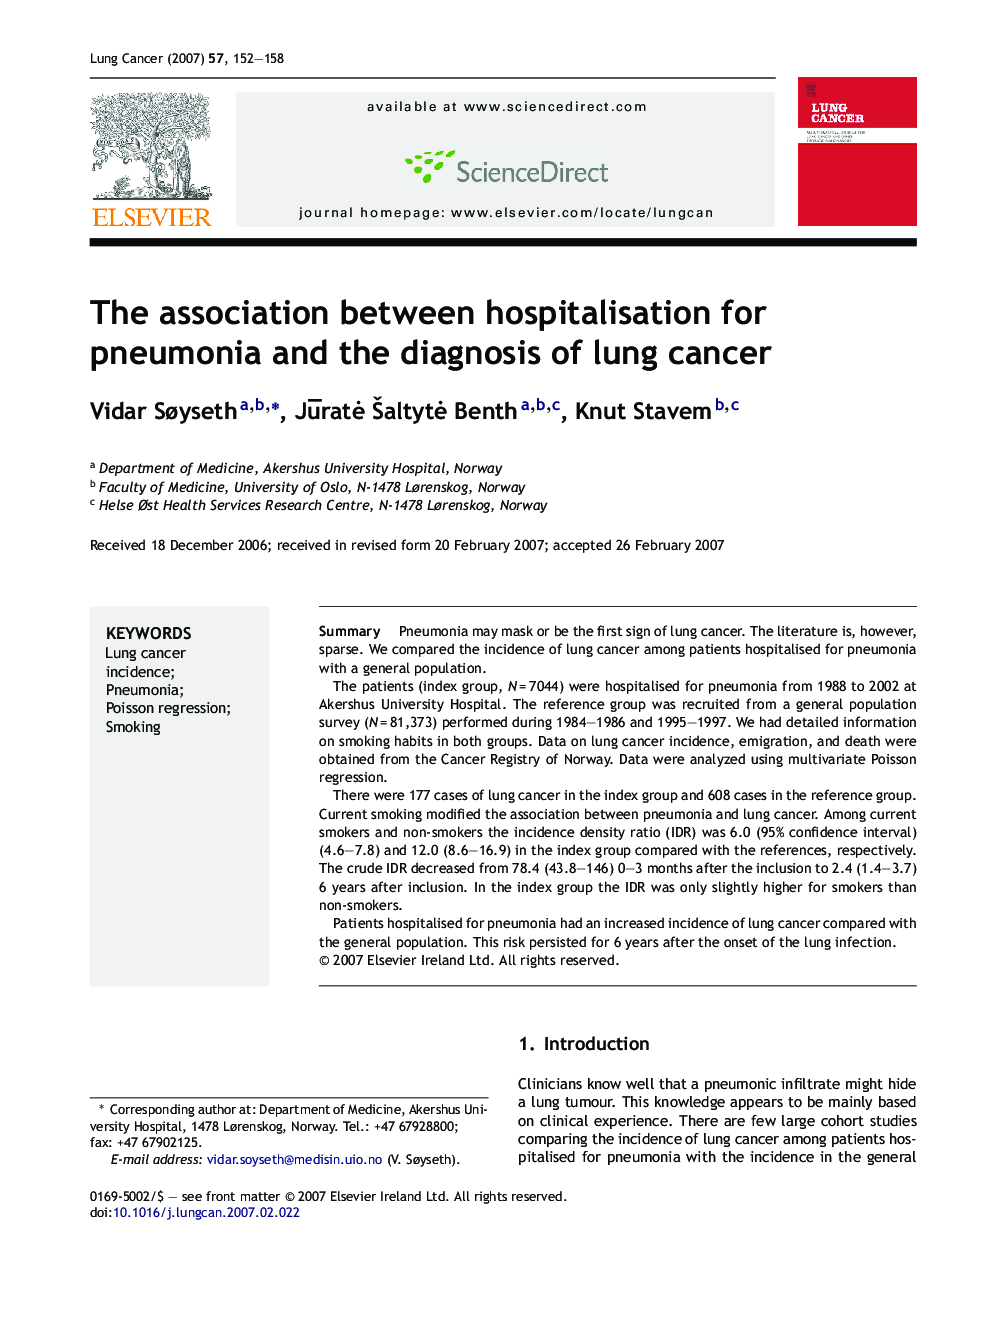 The association between hospitalisation for pneumonia and the diagnosis of lung cancer